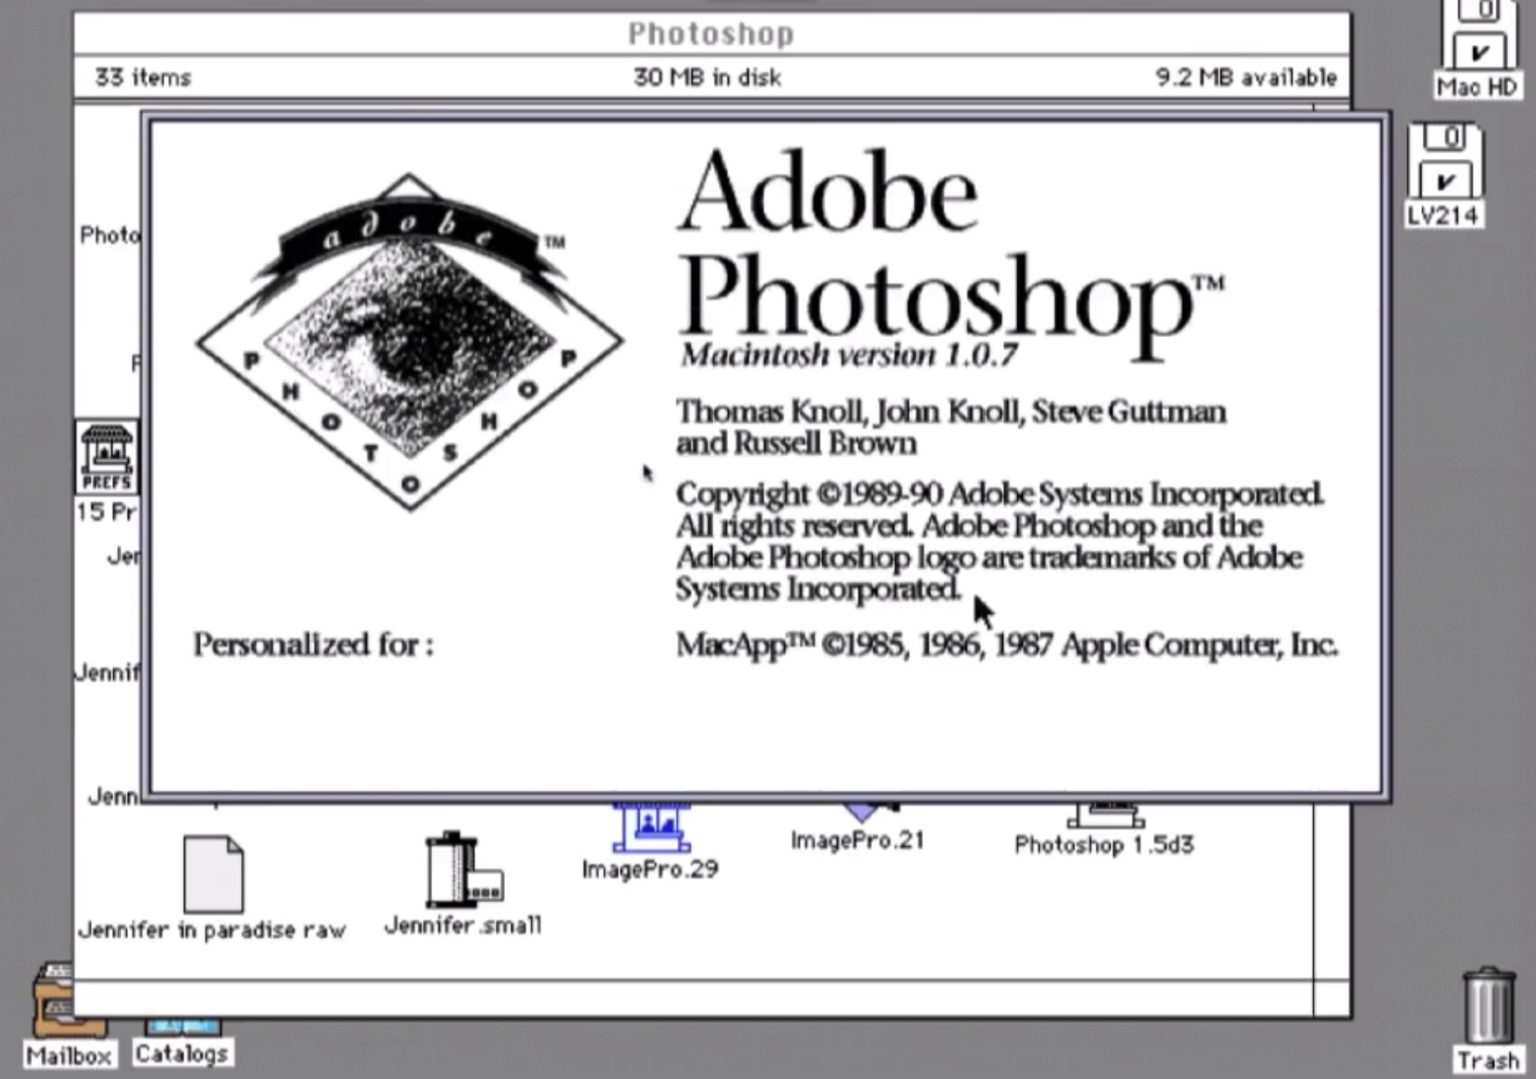 Adobe Systems' Photoshop launch changed the game for image editing.